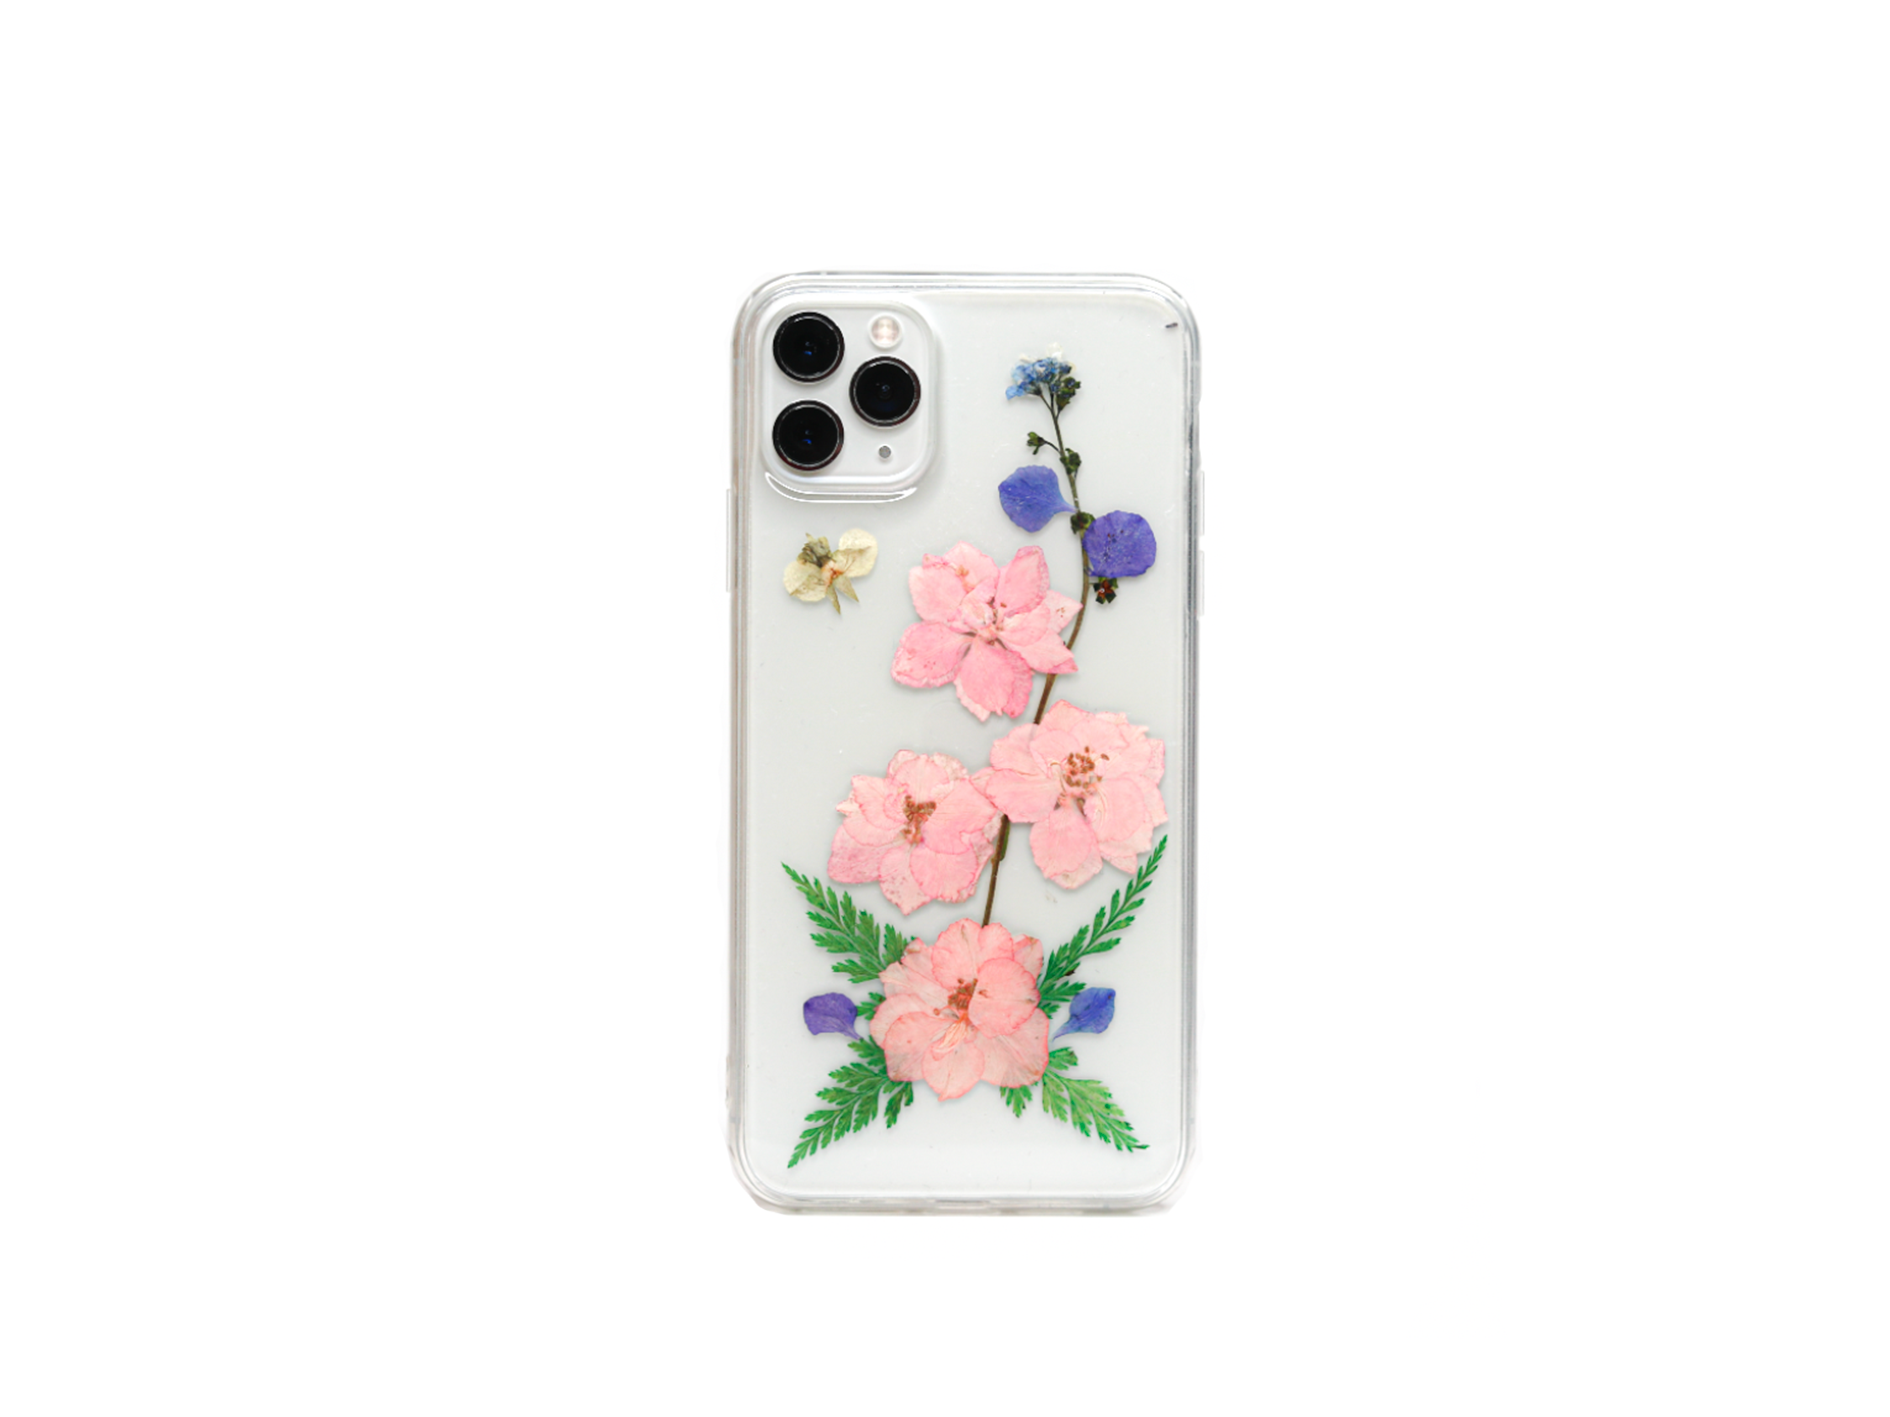 Real Pressed Pink flowers Phone Case, Dried Flowers Case, Samsung Galaxy S10 S9 S8 S7 case, iphone  SE 5 6 6s 7 8 plus x xr xs 11 12 13 pro max case